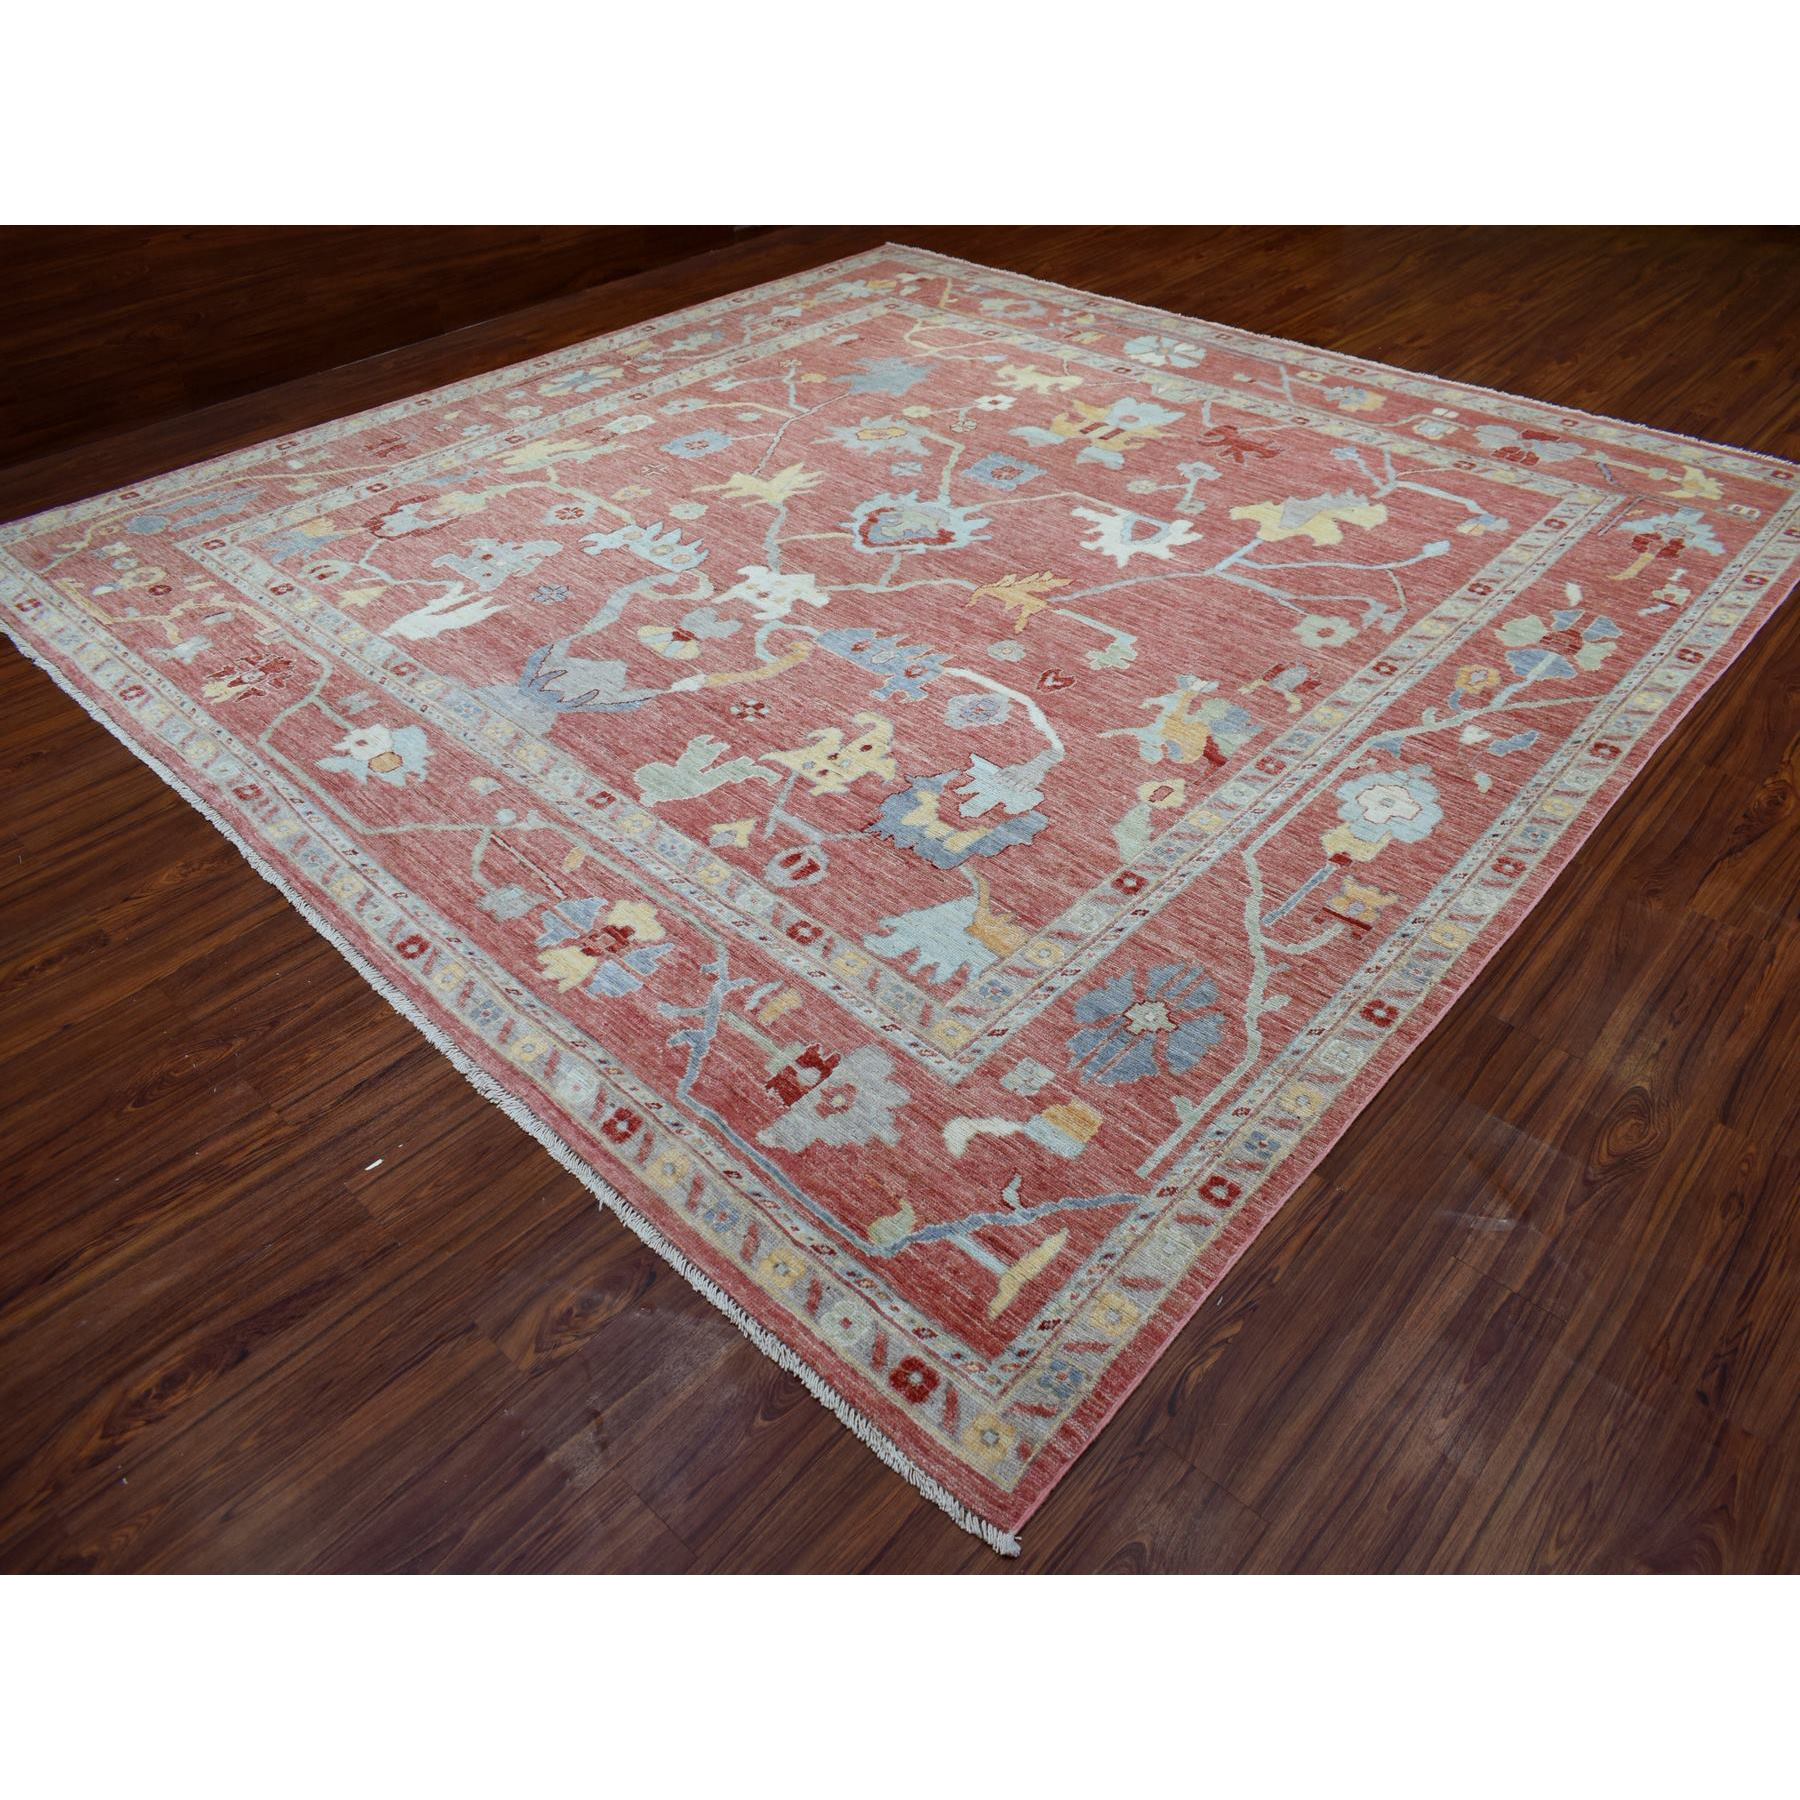 11'10"x11'10" Hand Woven, Coral Red, Afghan Angora Oushak with Floral Pattern, Pliable Wool, Oriental, Square, Rug 